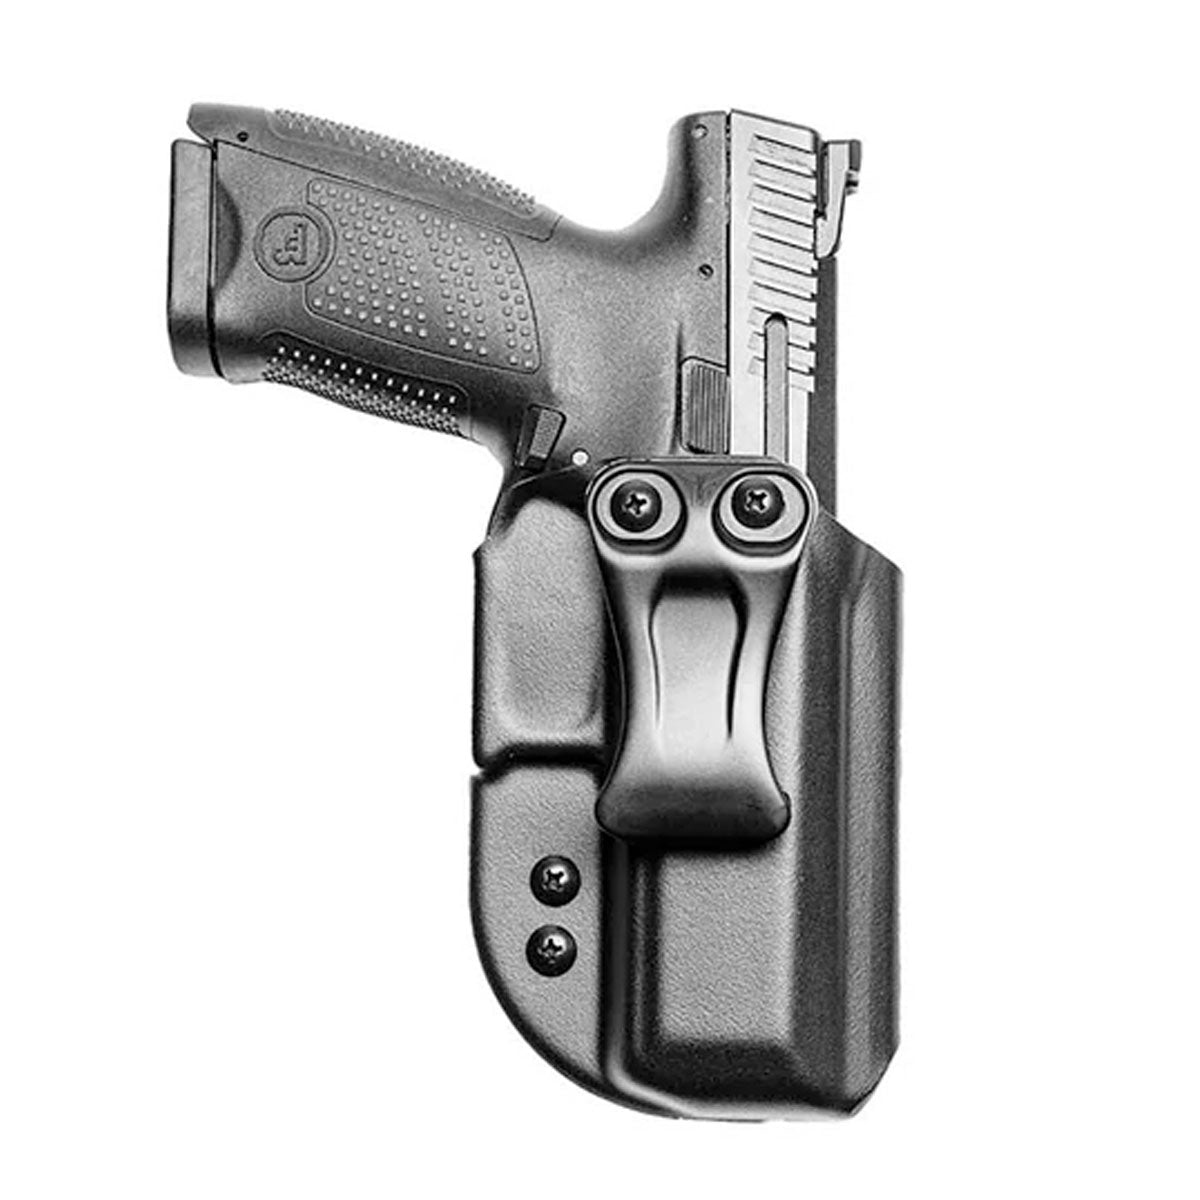 Blade-Tech Nano IWB Holster Black Right Hand Only Holsters Blade-Tech Holsters CZ / P10C Tactical Gear Supplier Tactical Distributors Australia